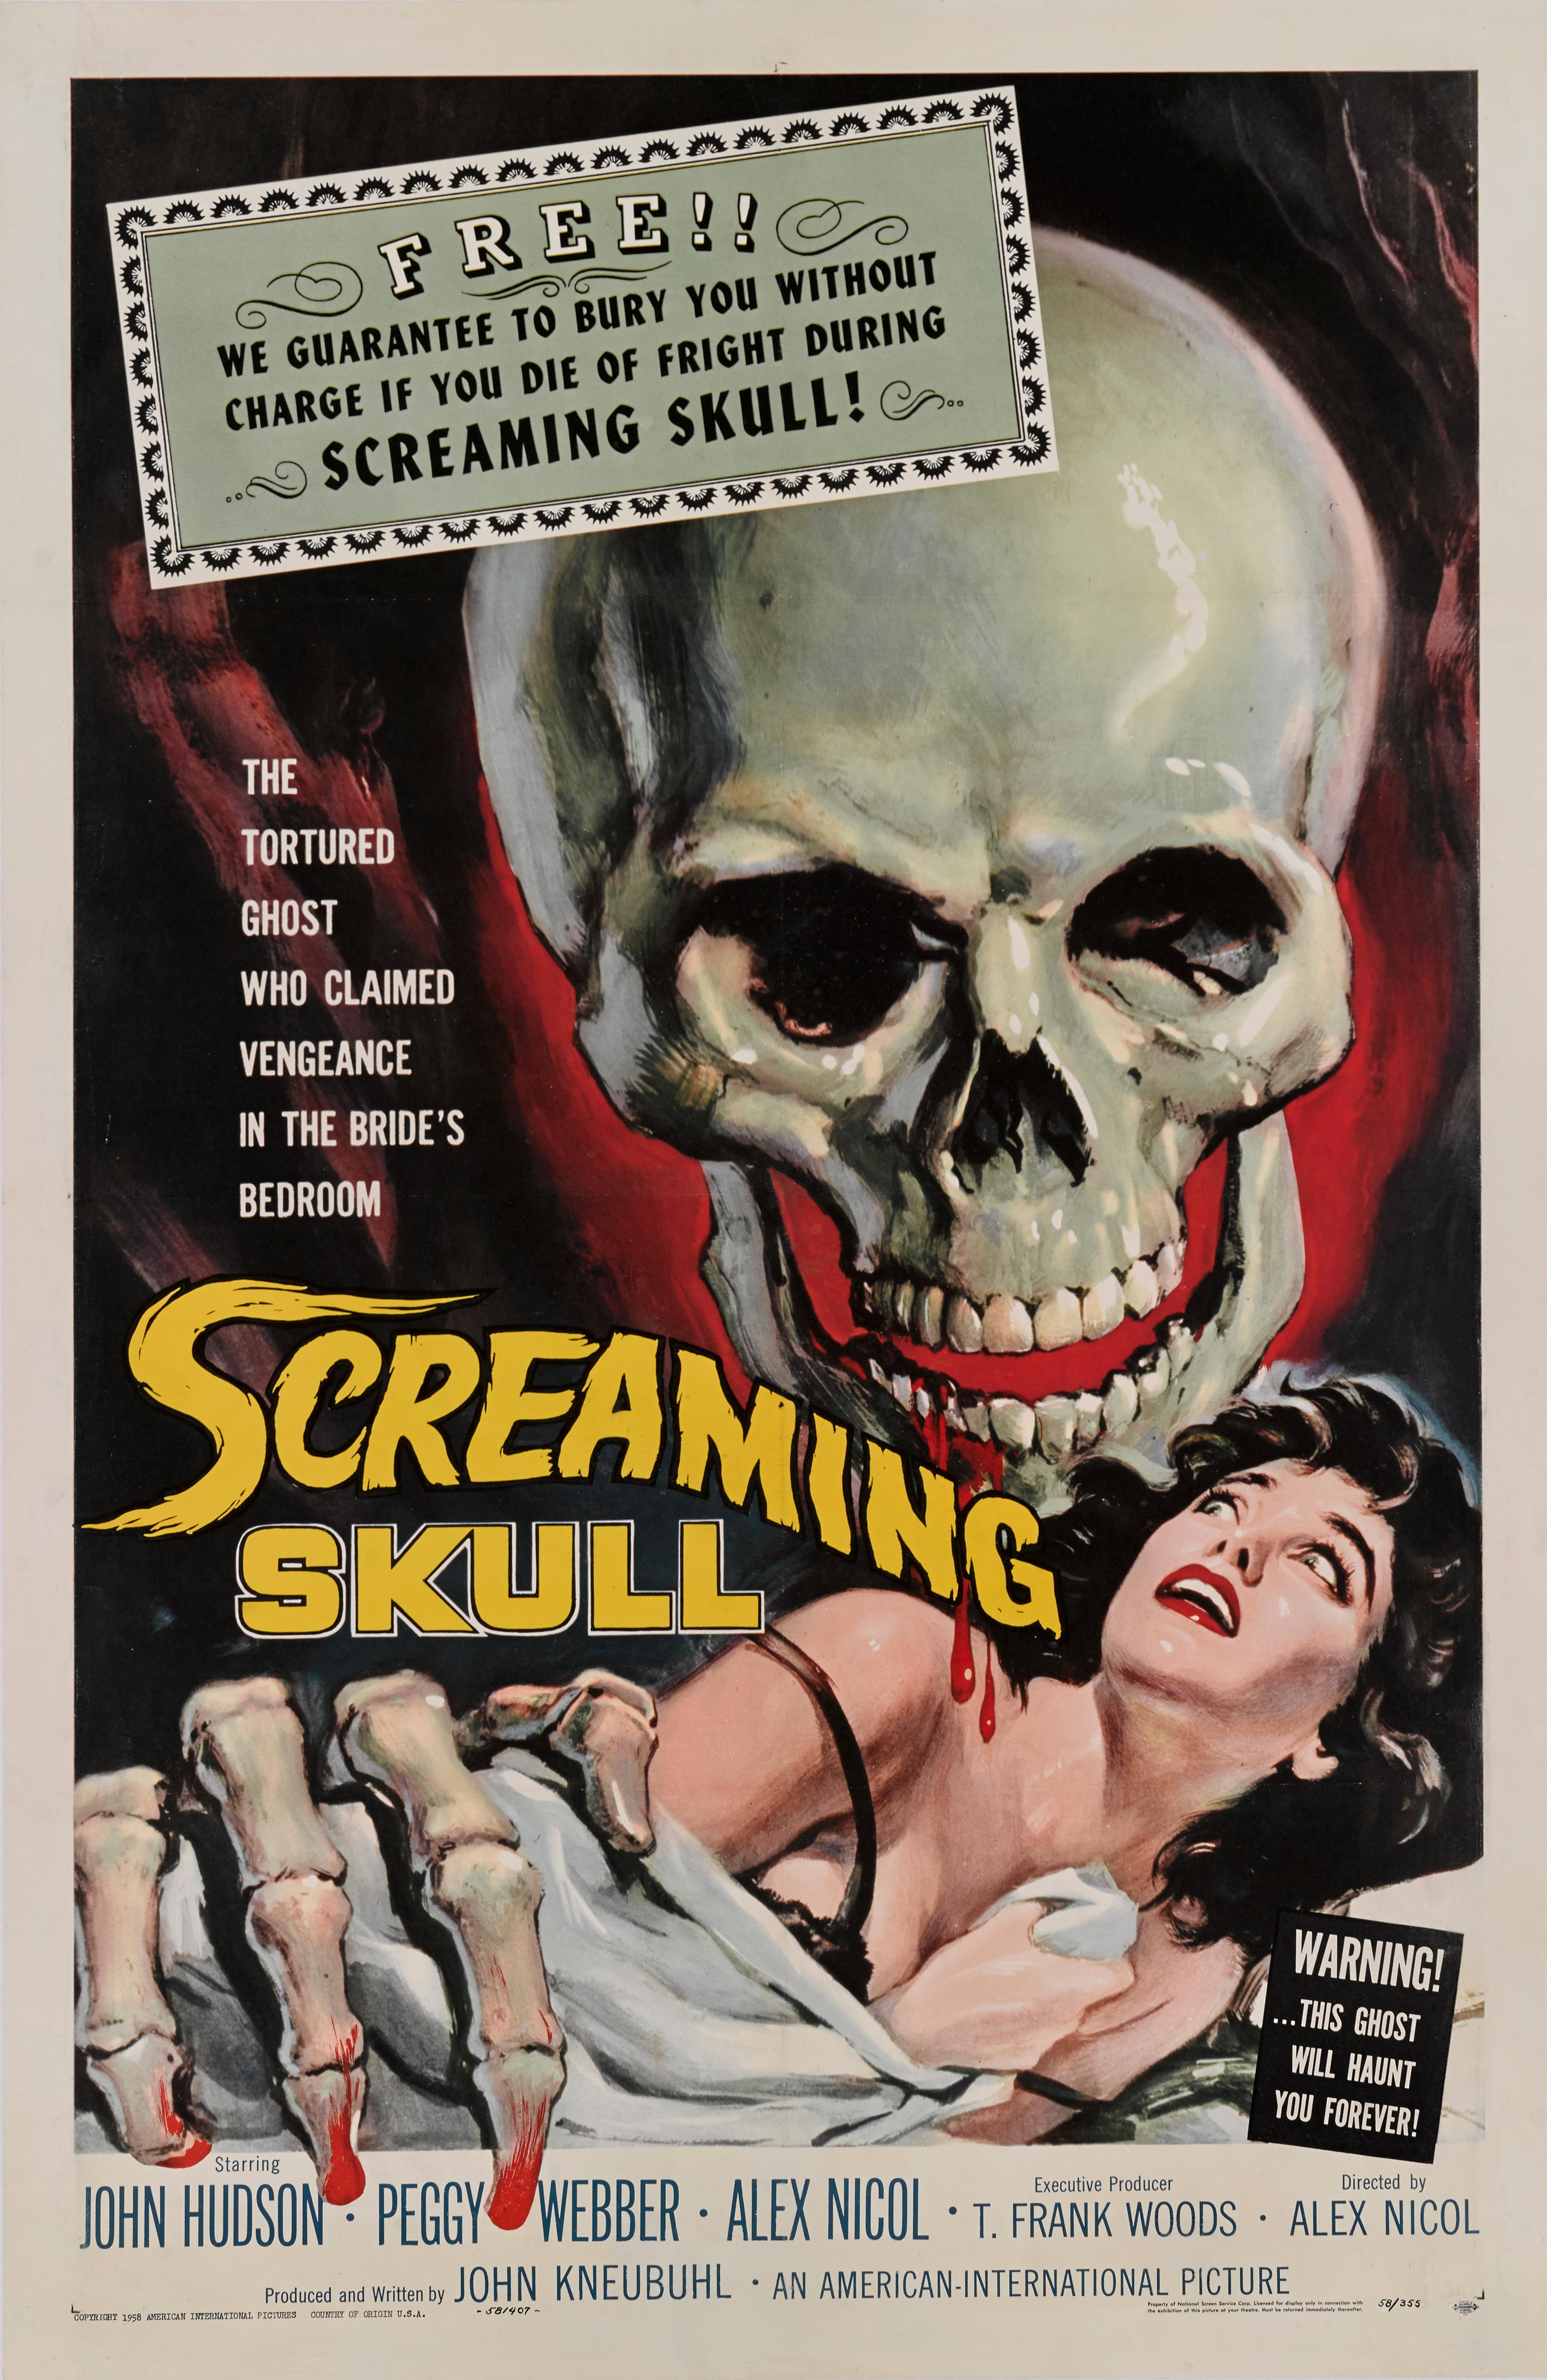 Original Us film poster for the 1958 Horror film starring John Hudson and Peggy webber.
The film was directed by Alex Nicol
This poster is conservation linen backed and it would be shipped rolled in a strong tube.